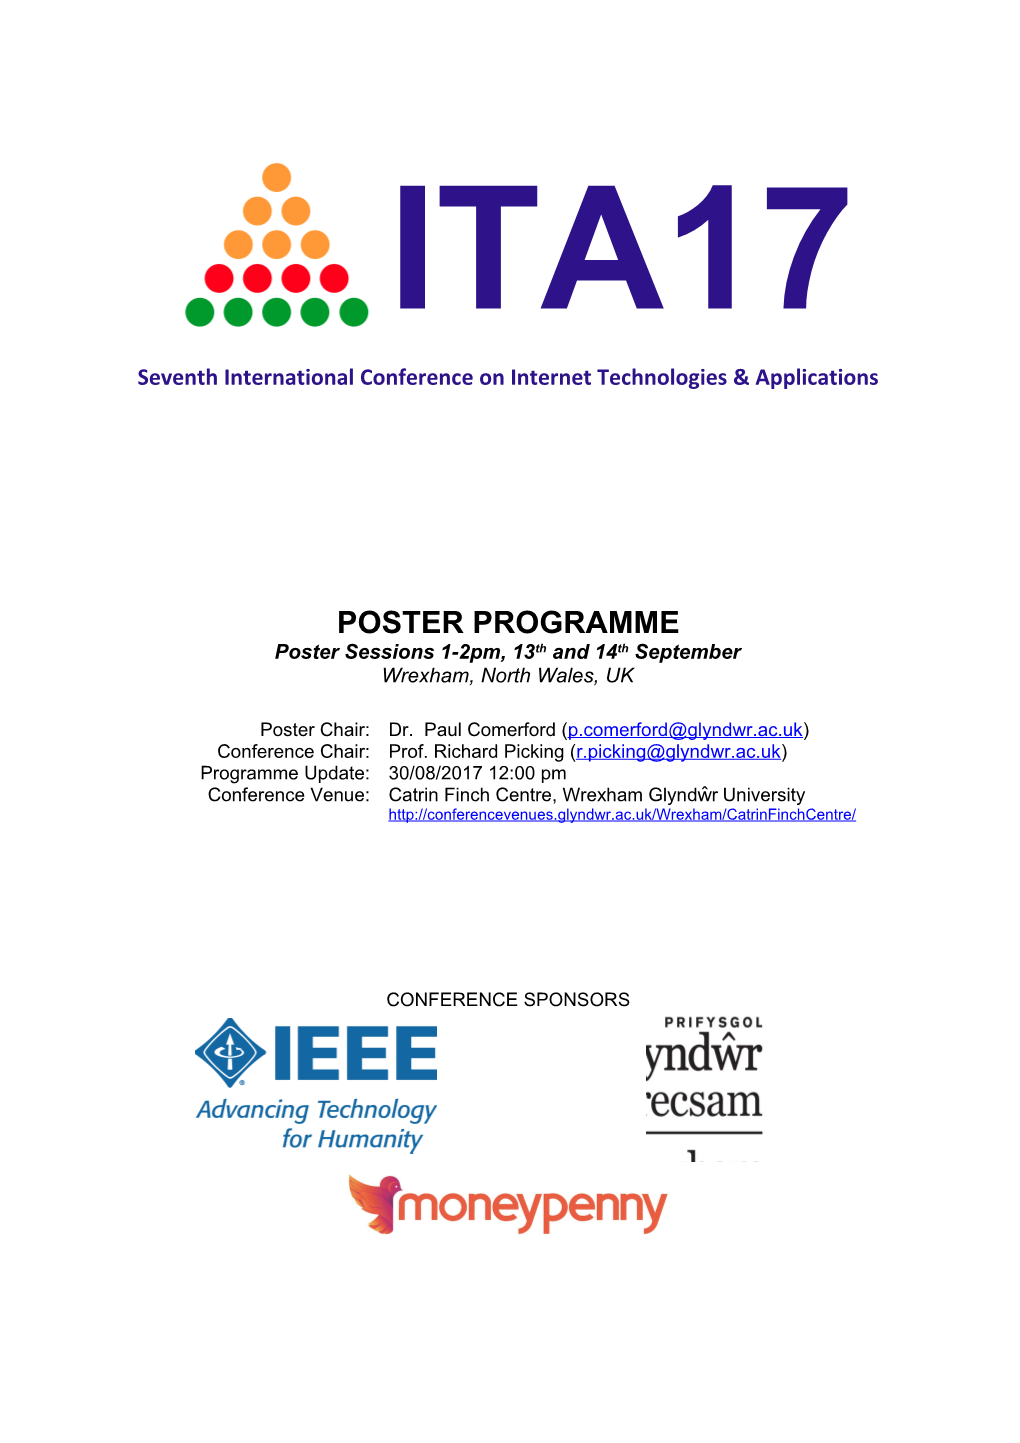 Seventh International Conference on Internet Technologies & Applications